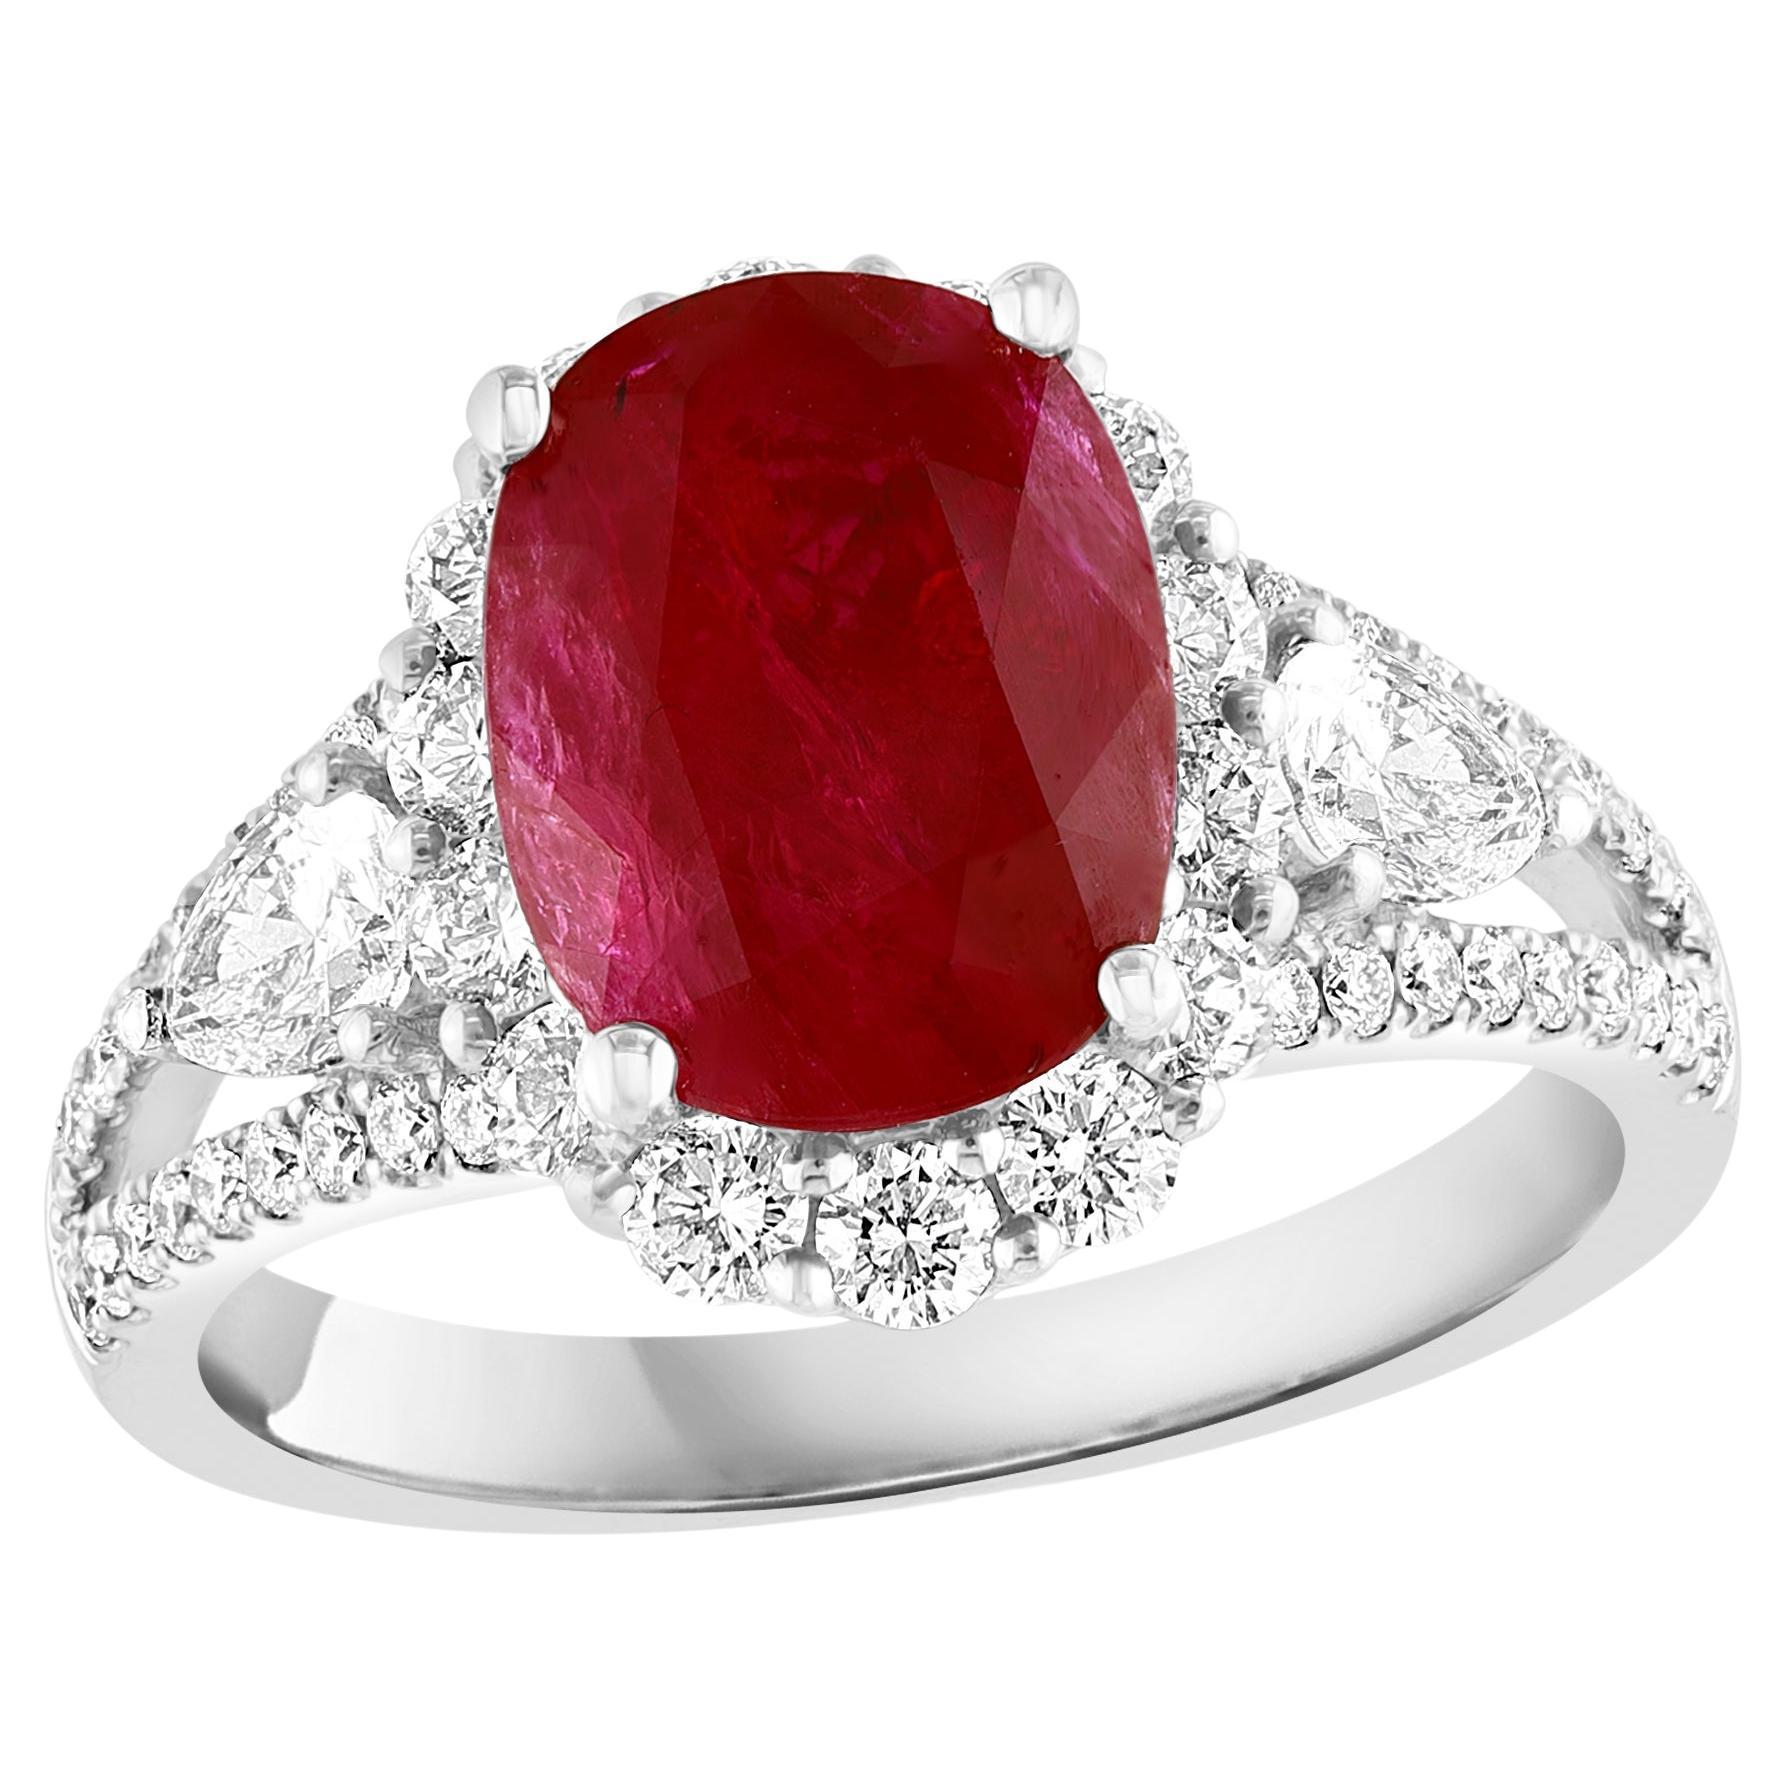 3.58 Carat Oval Cut Ruby and Diamond Halo Ring in 18K White Gold For Sale